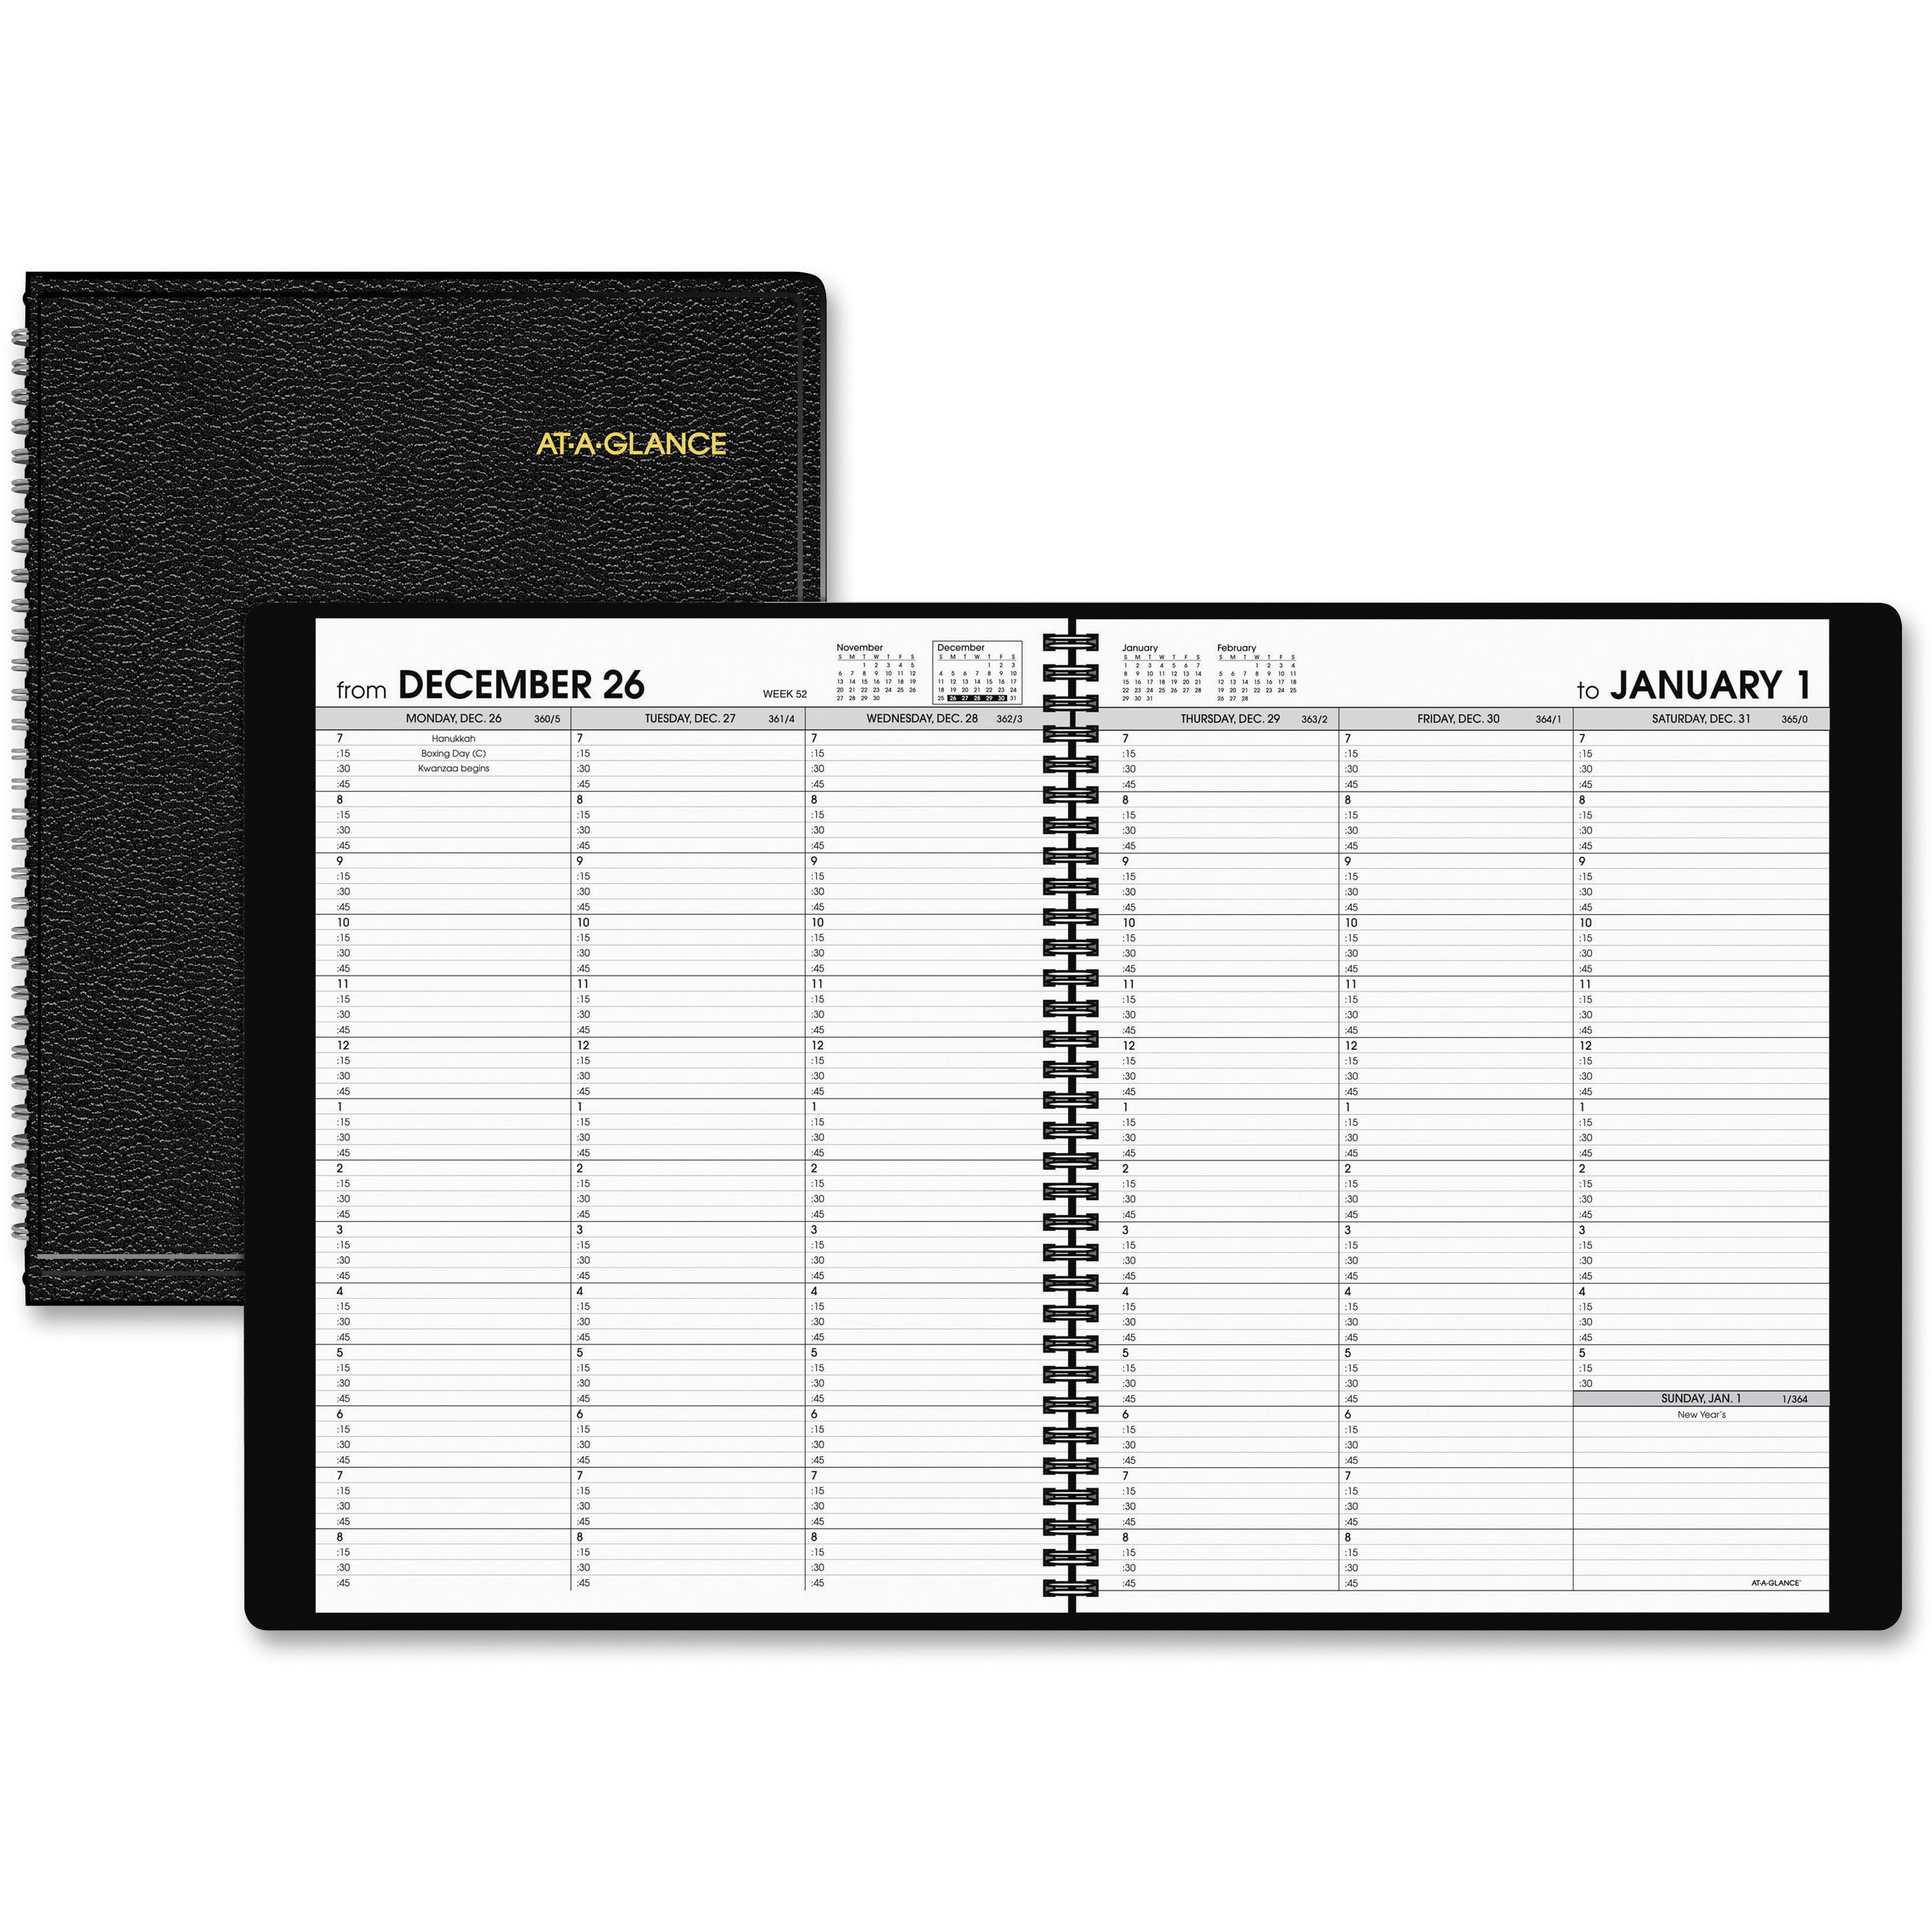 8" x 10" 2021 Weekly Appointment Book/Hourly Planner 2021 Weekly Planner 2021 